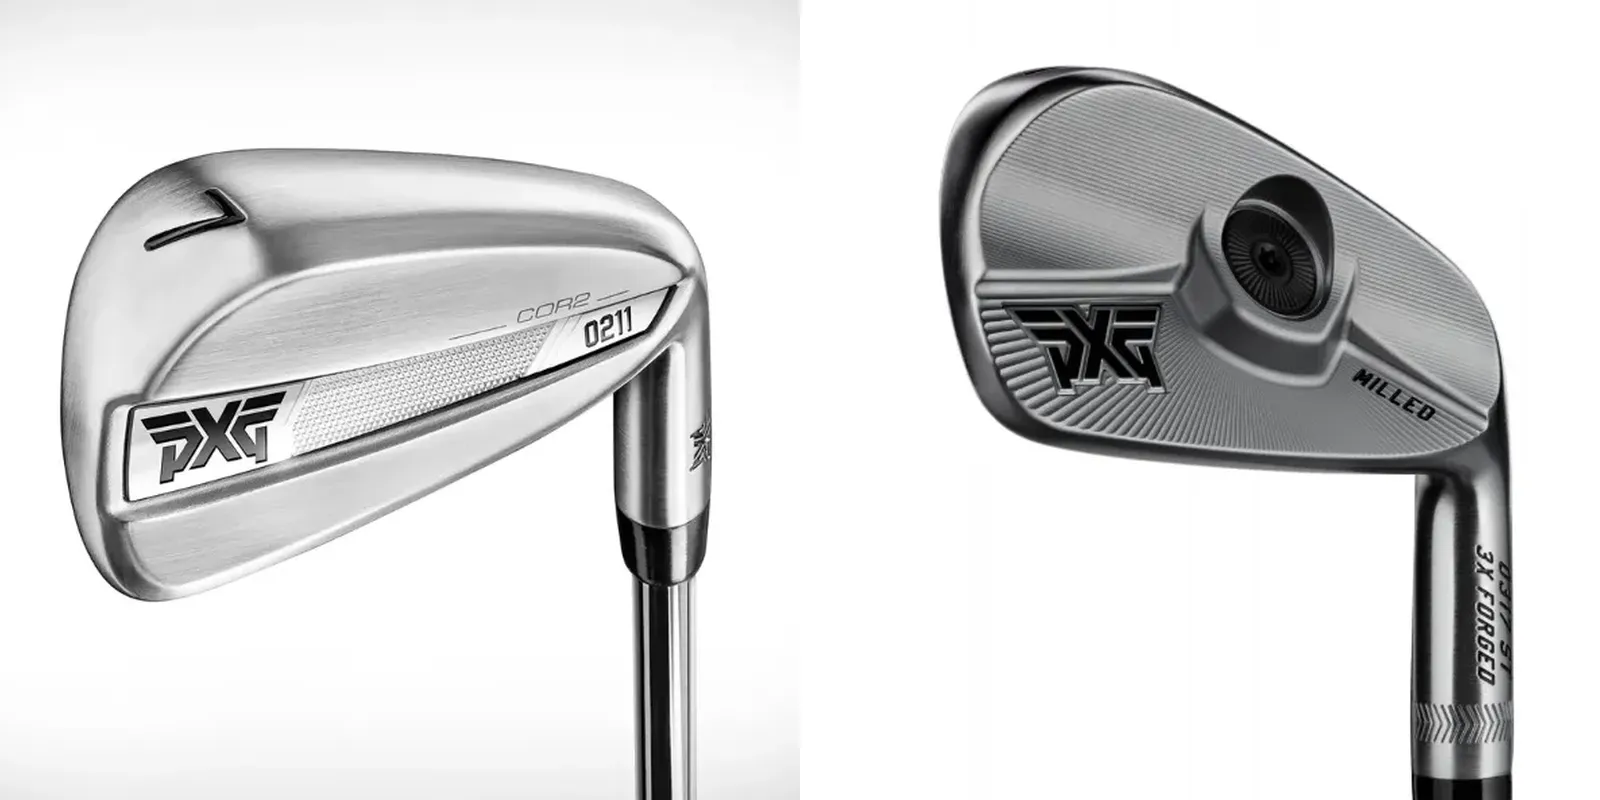 PXG 0211 st irons vs 0317 t irons